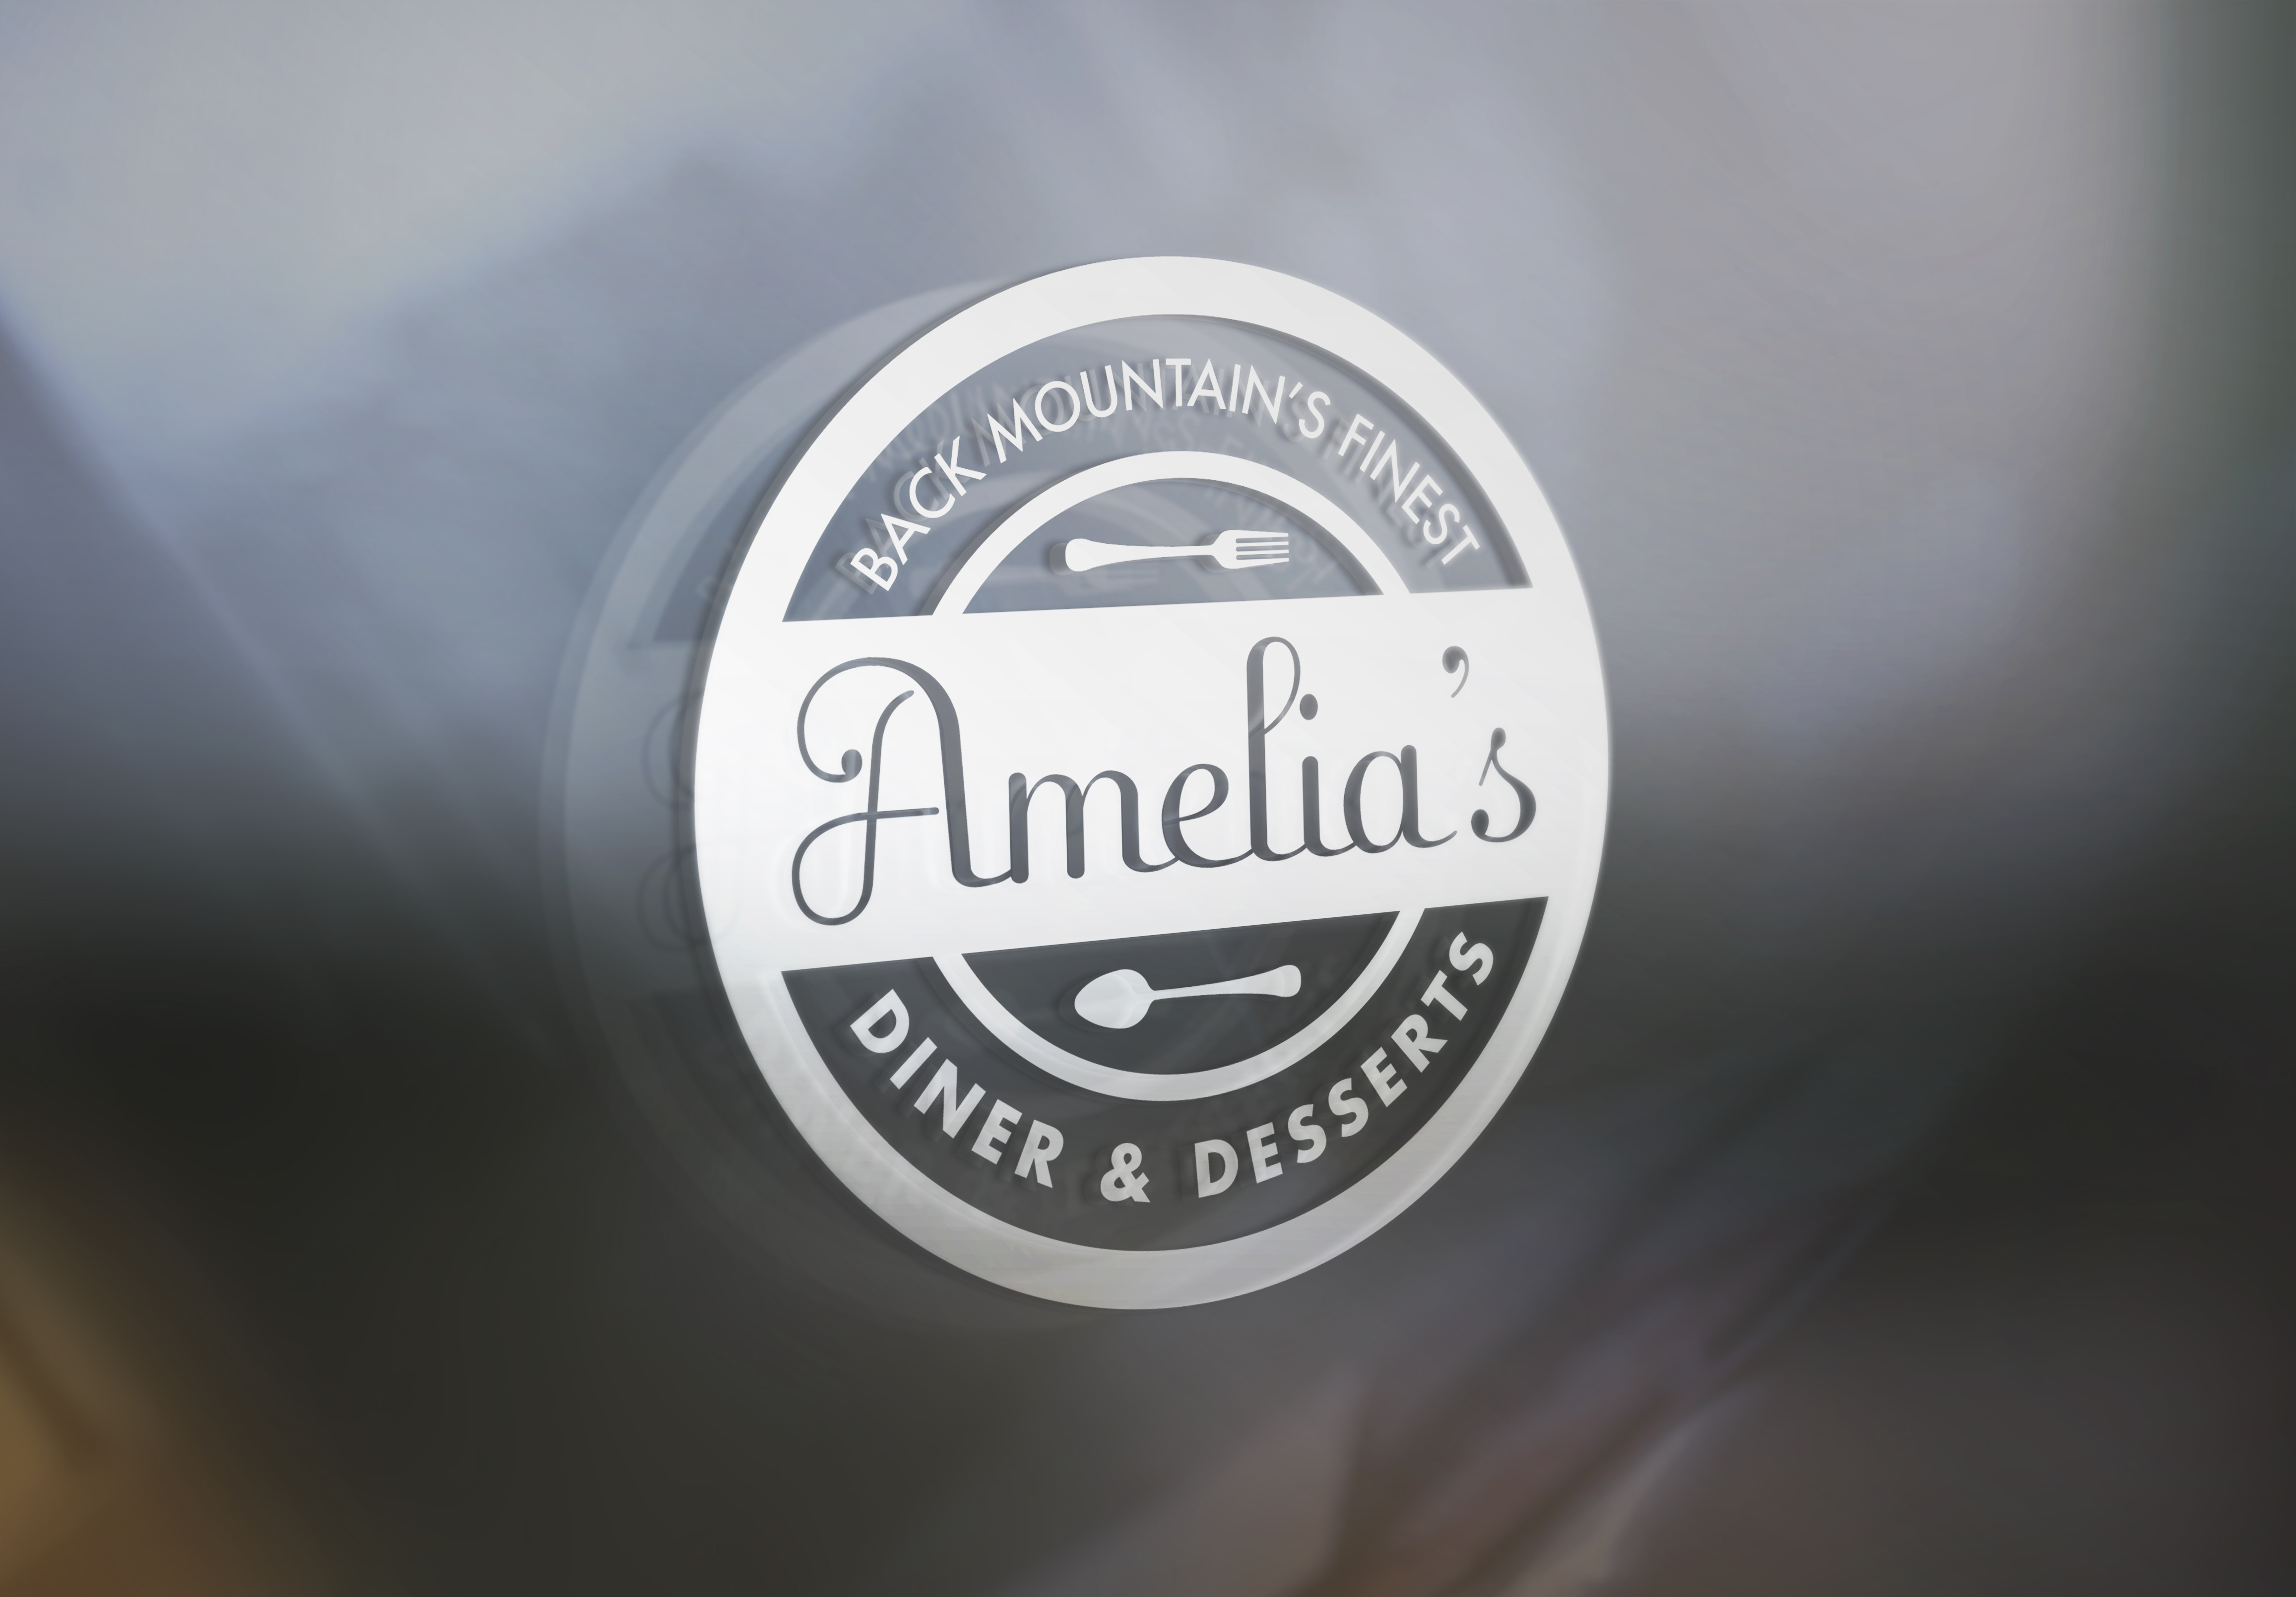 Brand Identity by Just Make Things – Amelia's Diner Window